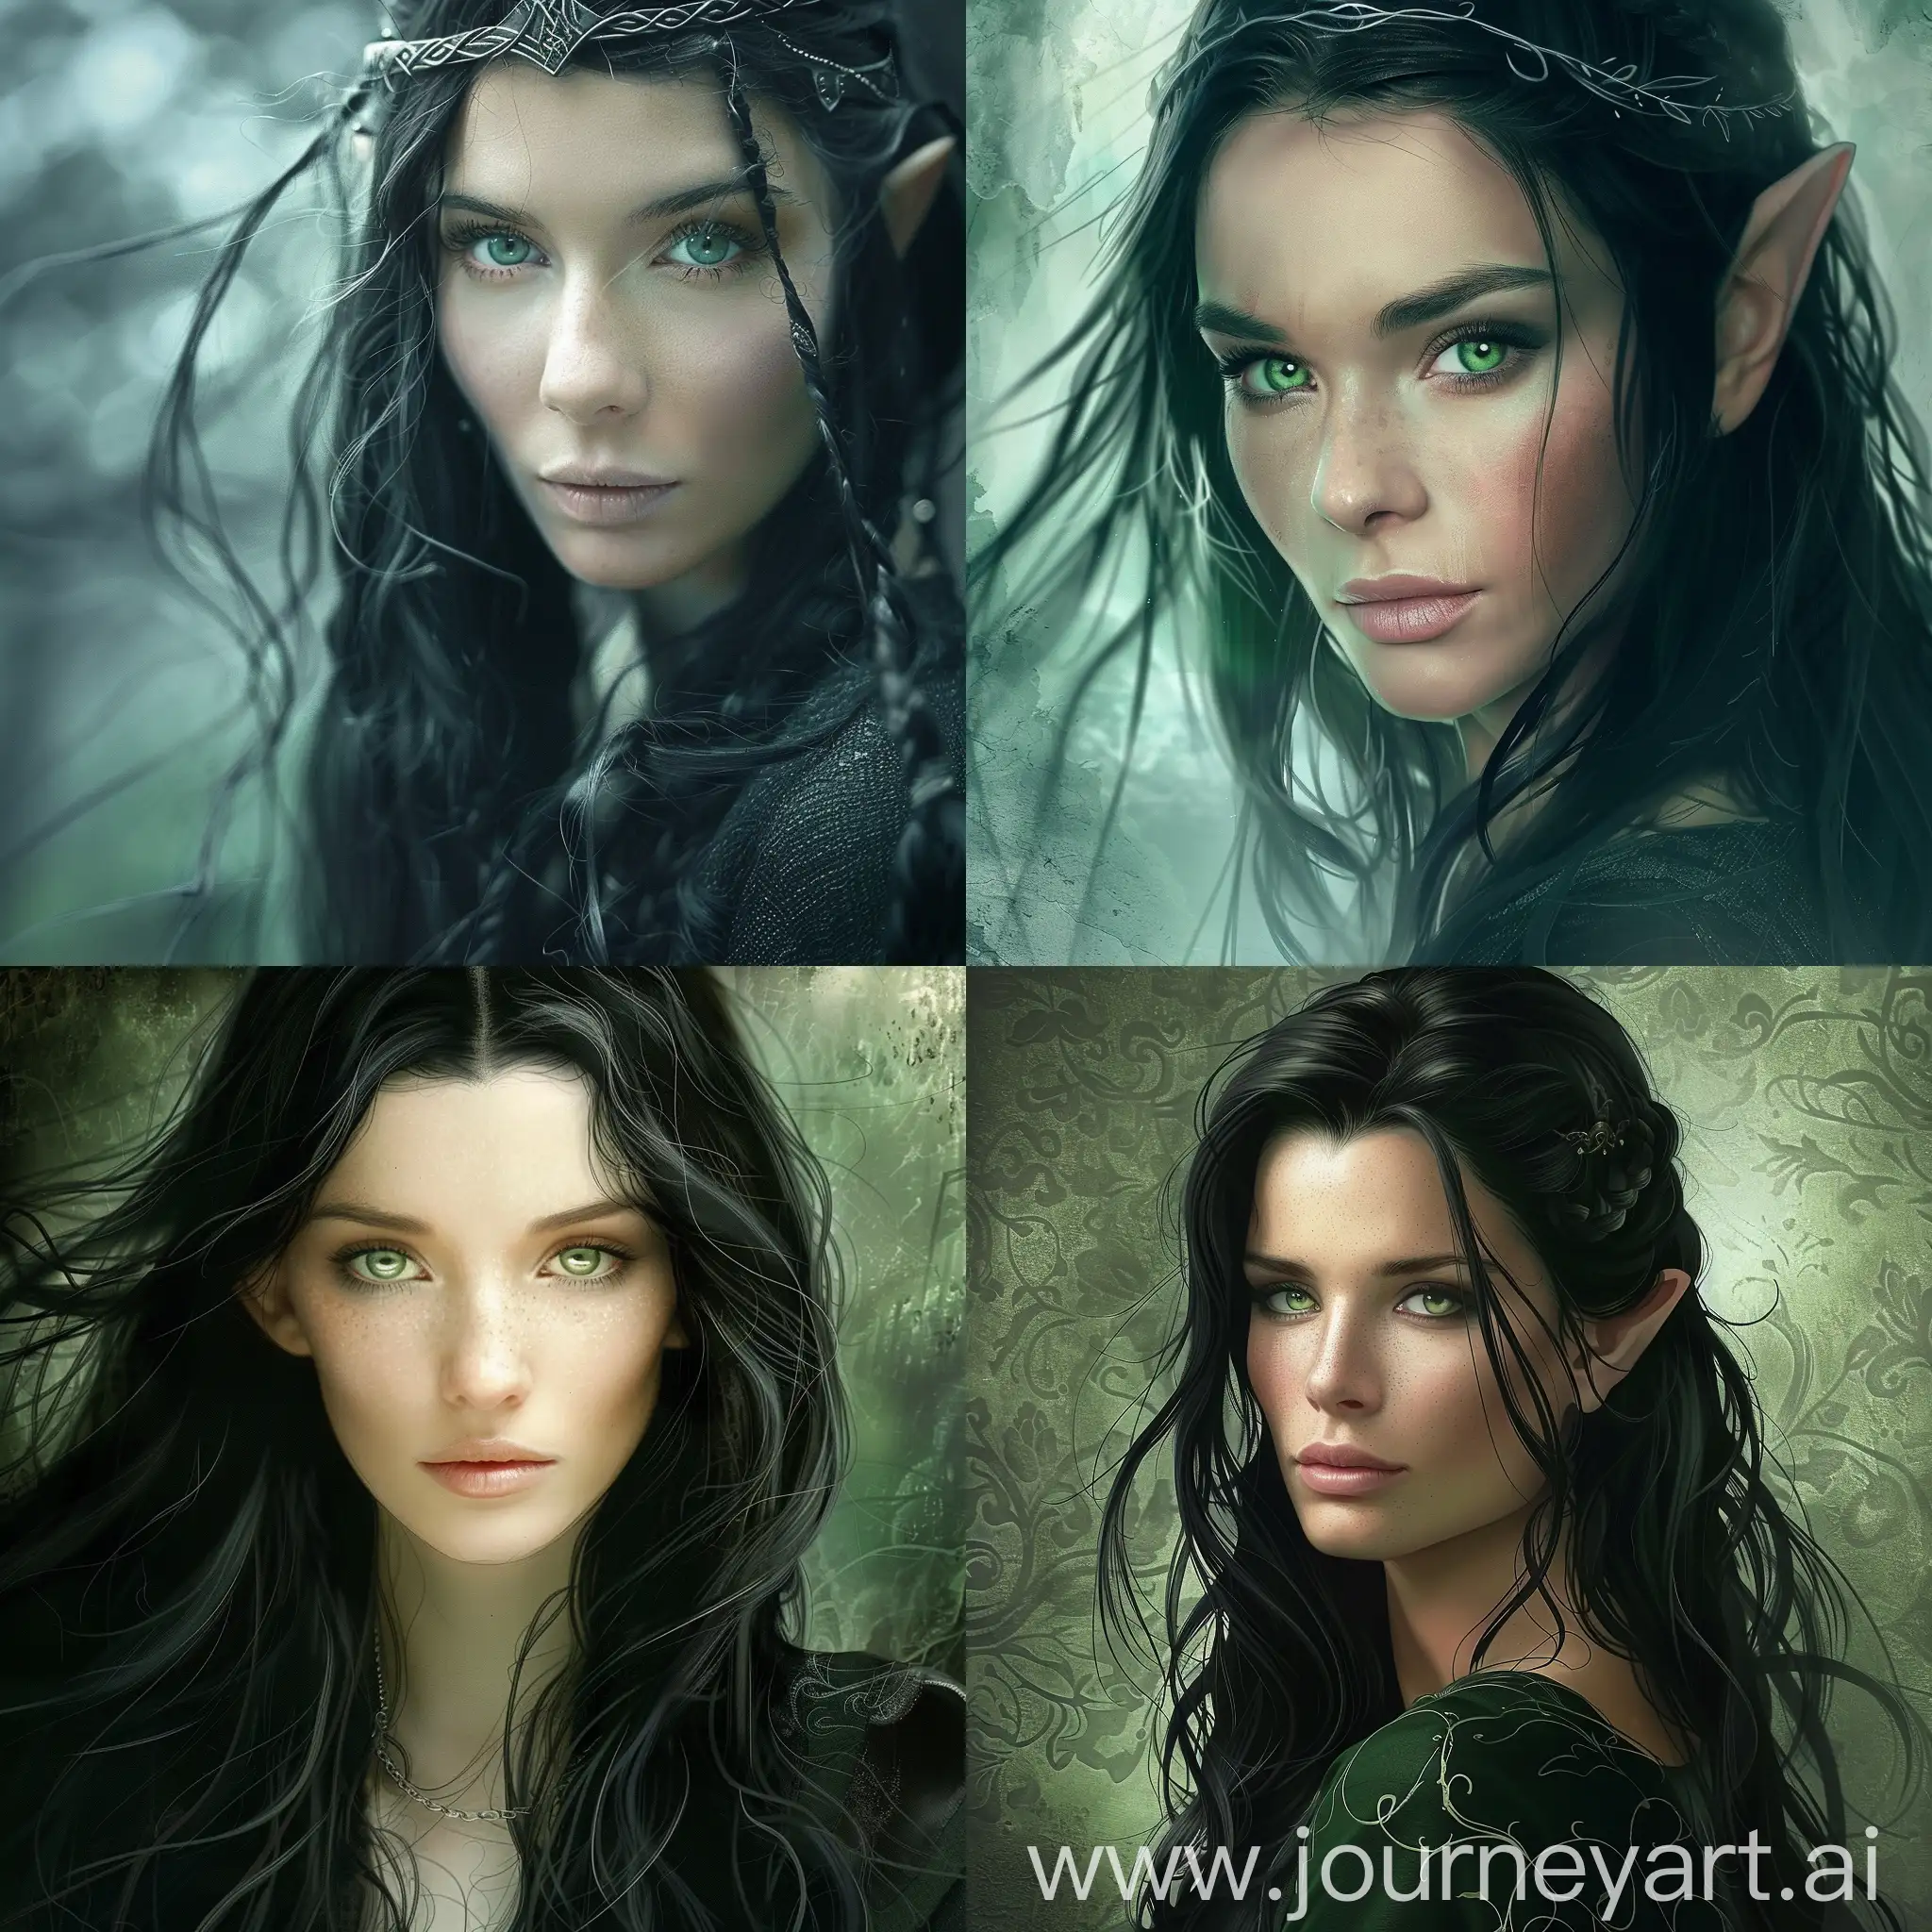 A beautiful Elven woman with long black hair and pale green eyes. Lord of the rings.